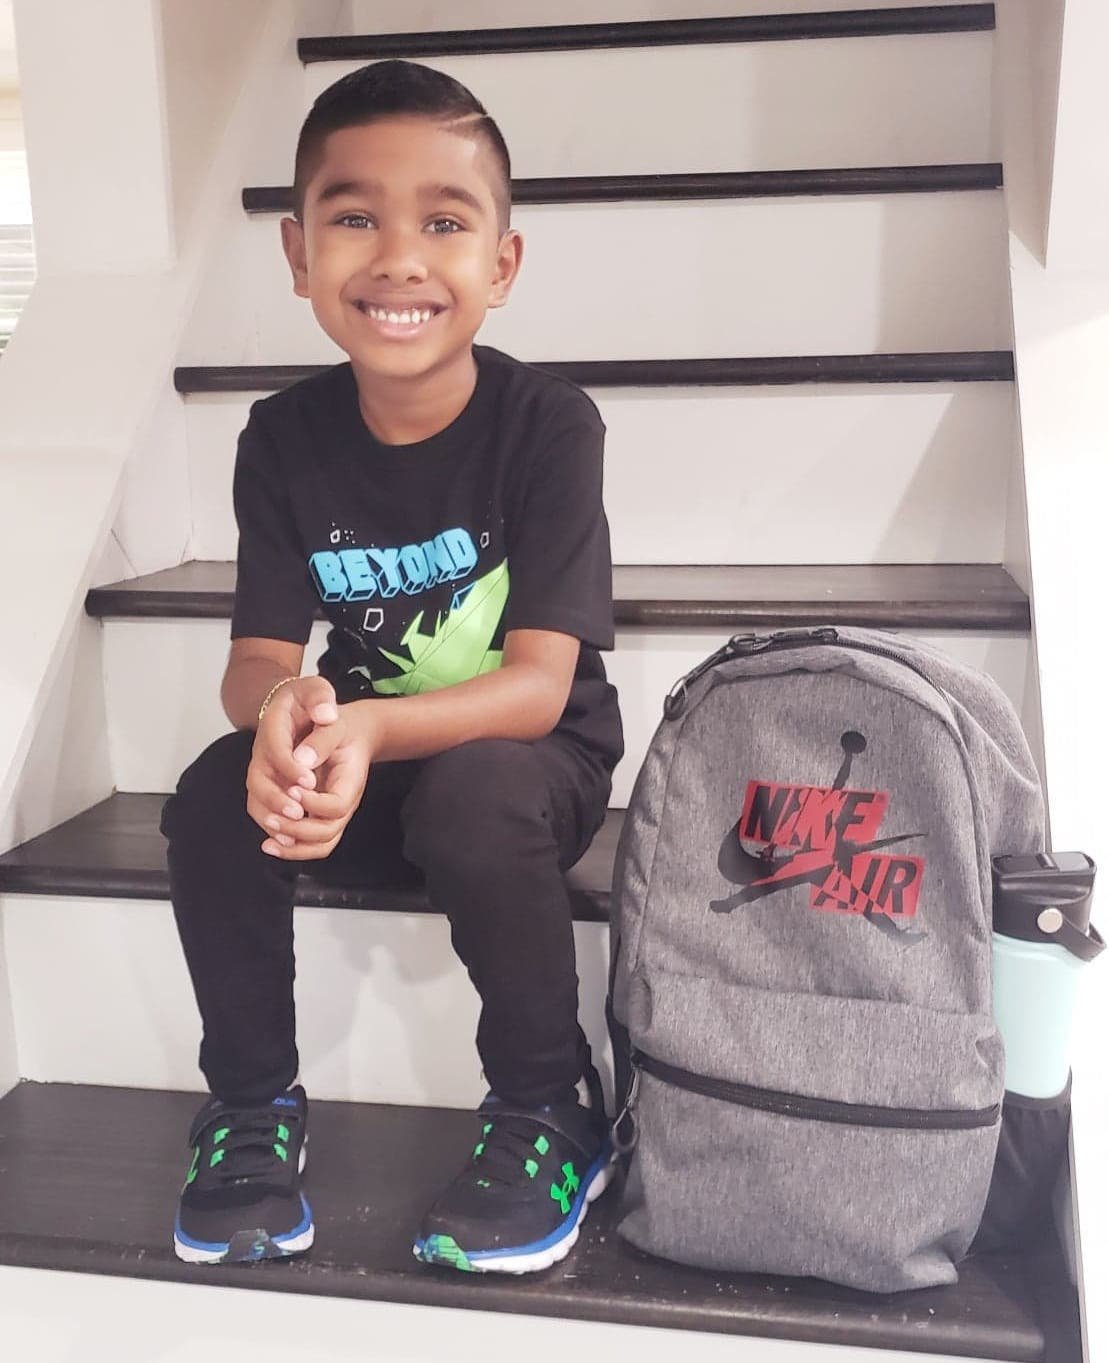 Nathan, who is a second grader for the 2022-2023 school year at Lincoln Avenue Elementary in Sayville, was “very excited to meet his new teacher and friends, and very eager to learn exciting new things in every subject area,” according to his mom.